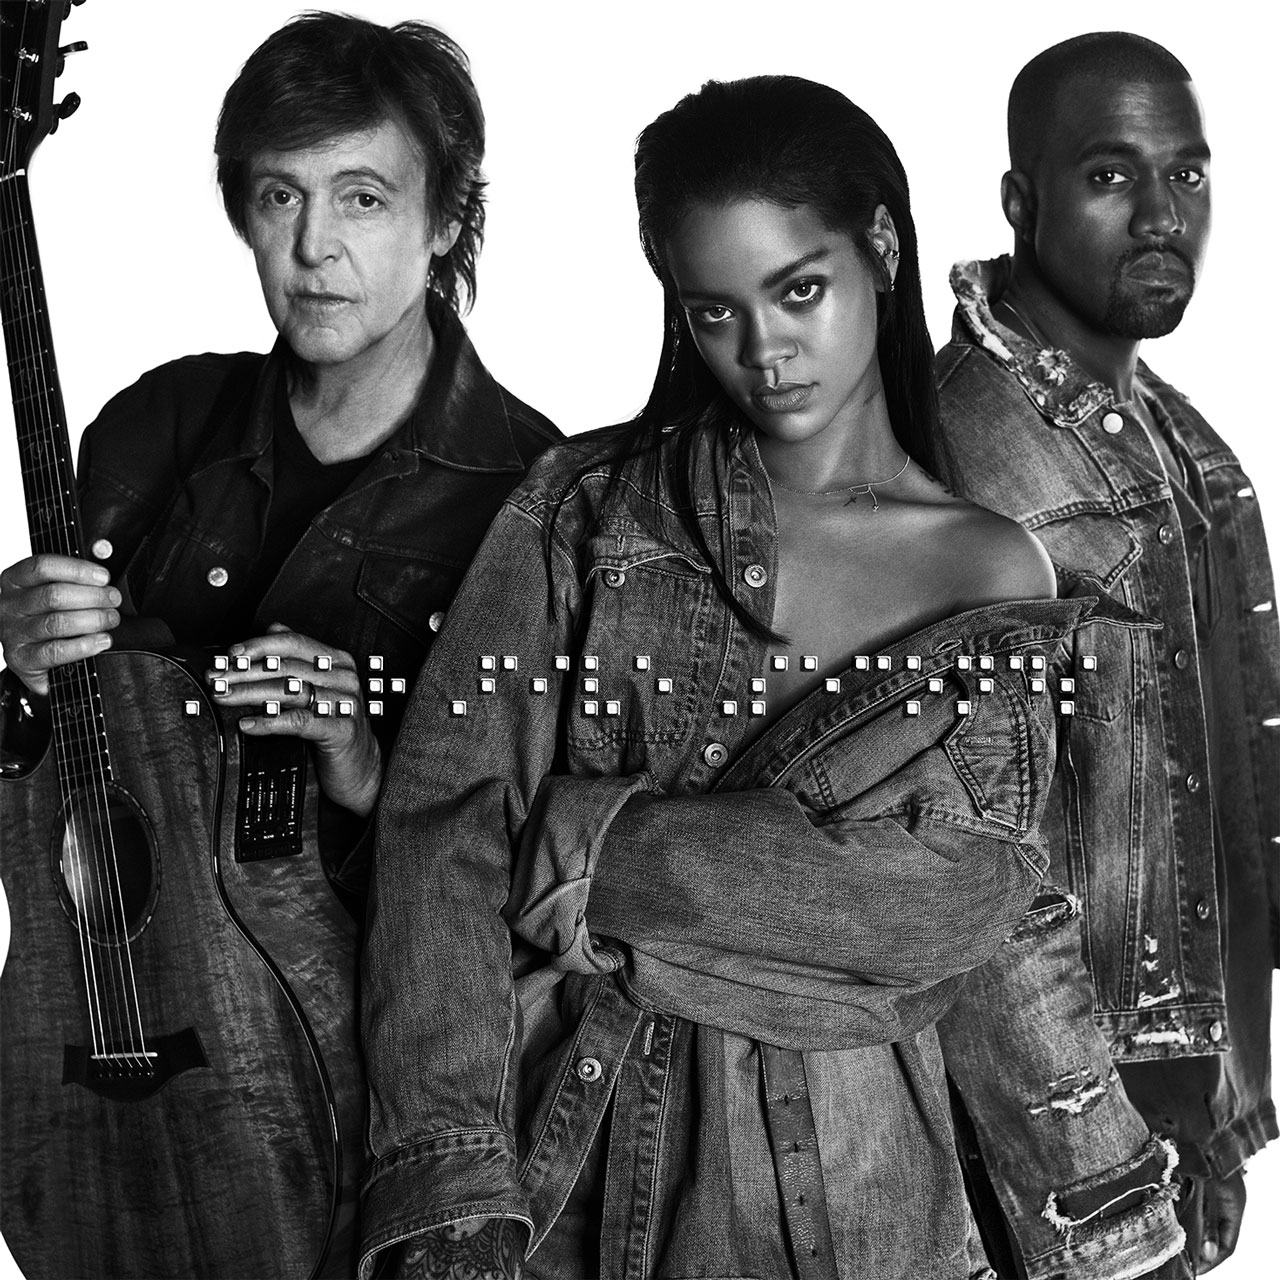 Rihanna releases new song ‘Four Five Seconds’ featuring Kanye, Paul McCartney